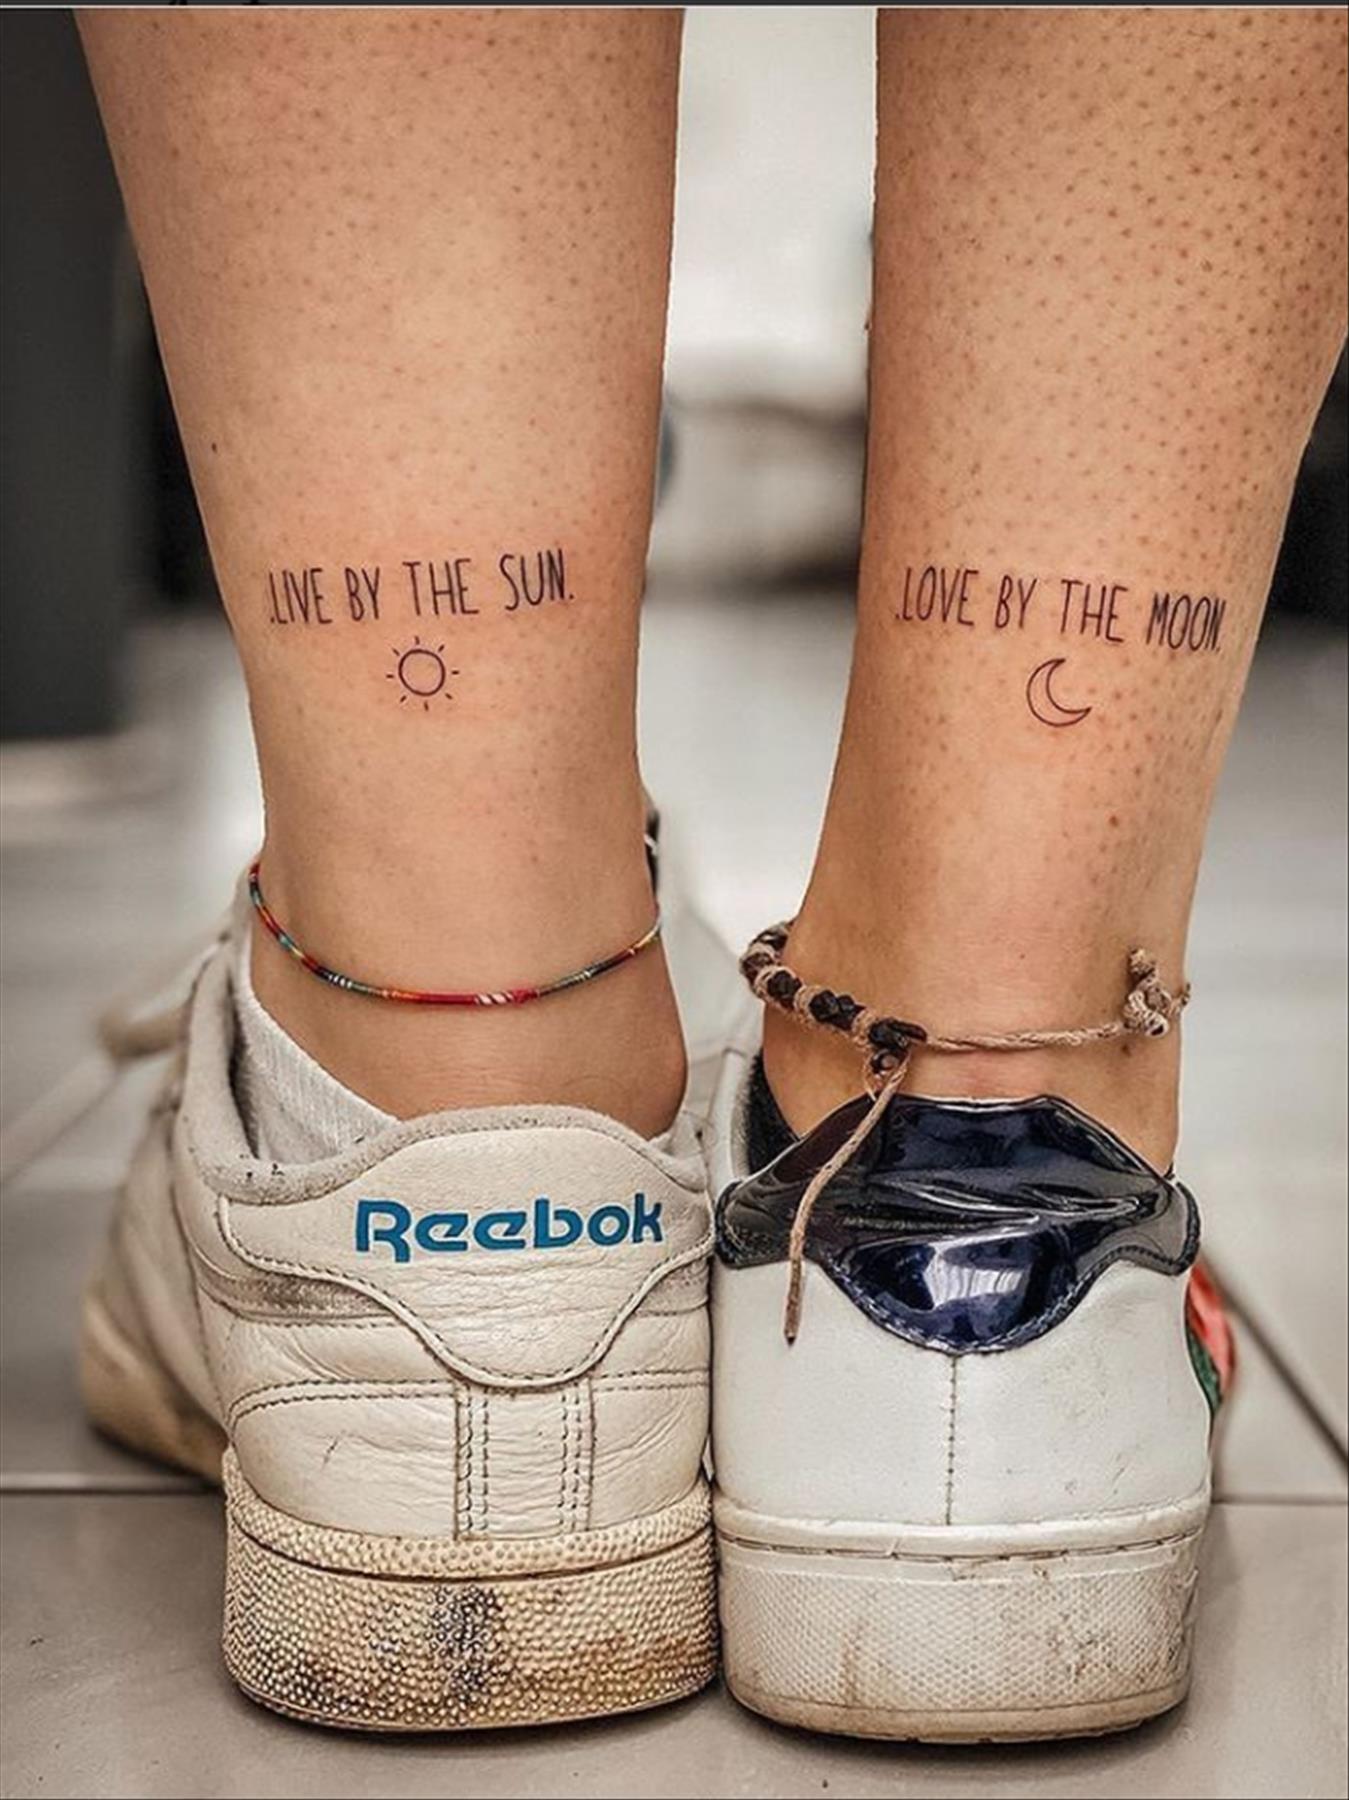 Unique foot tattoos for women to get inspiration